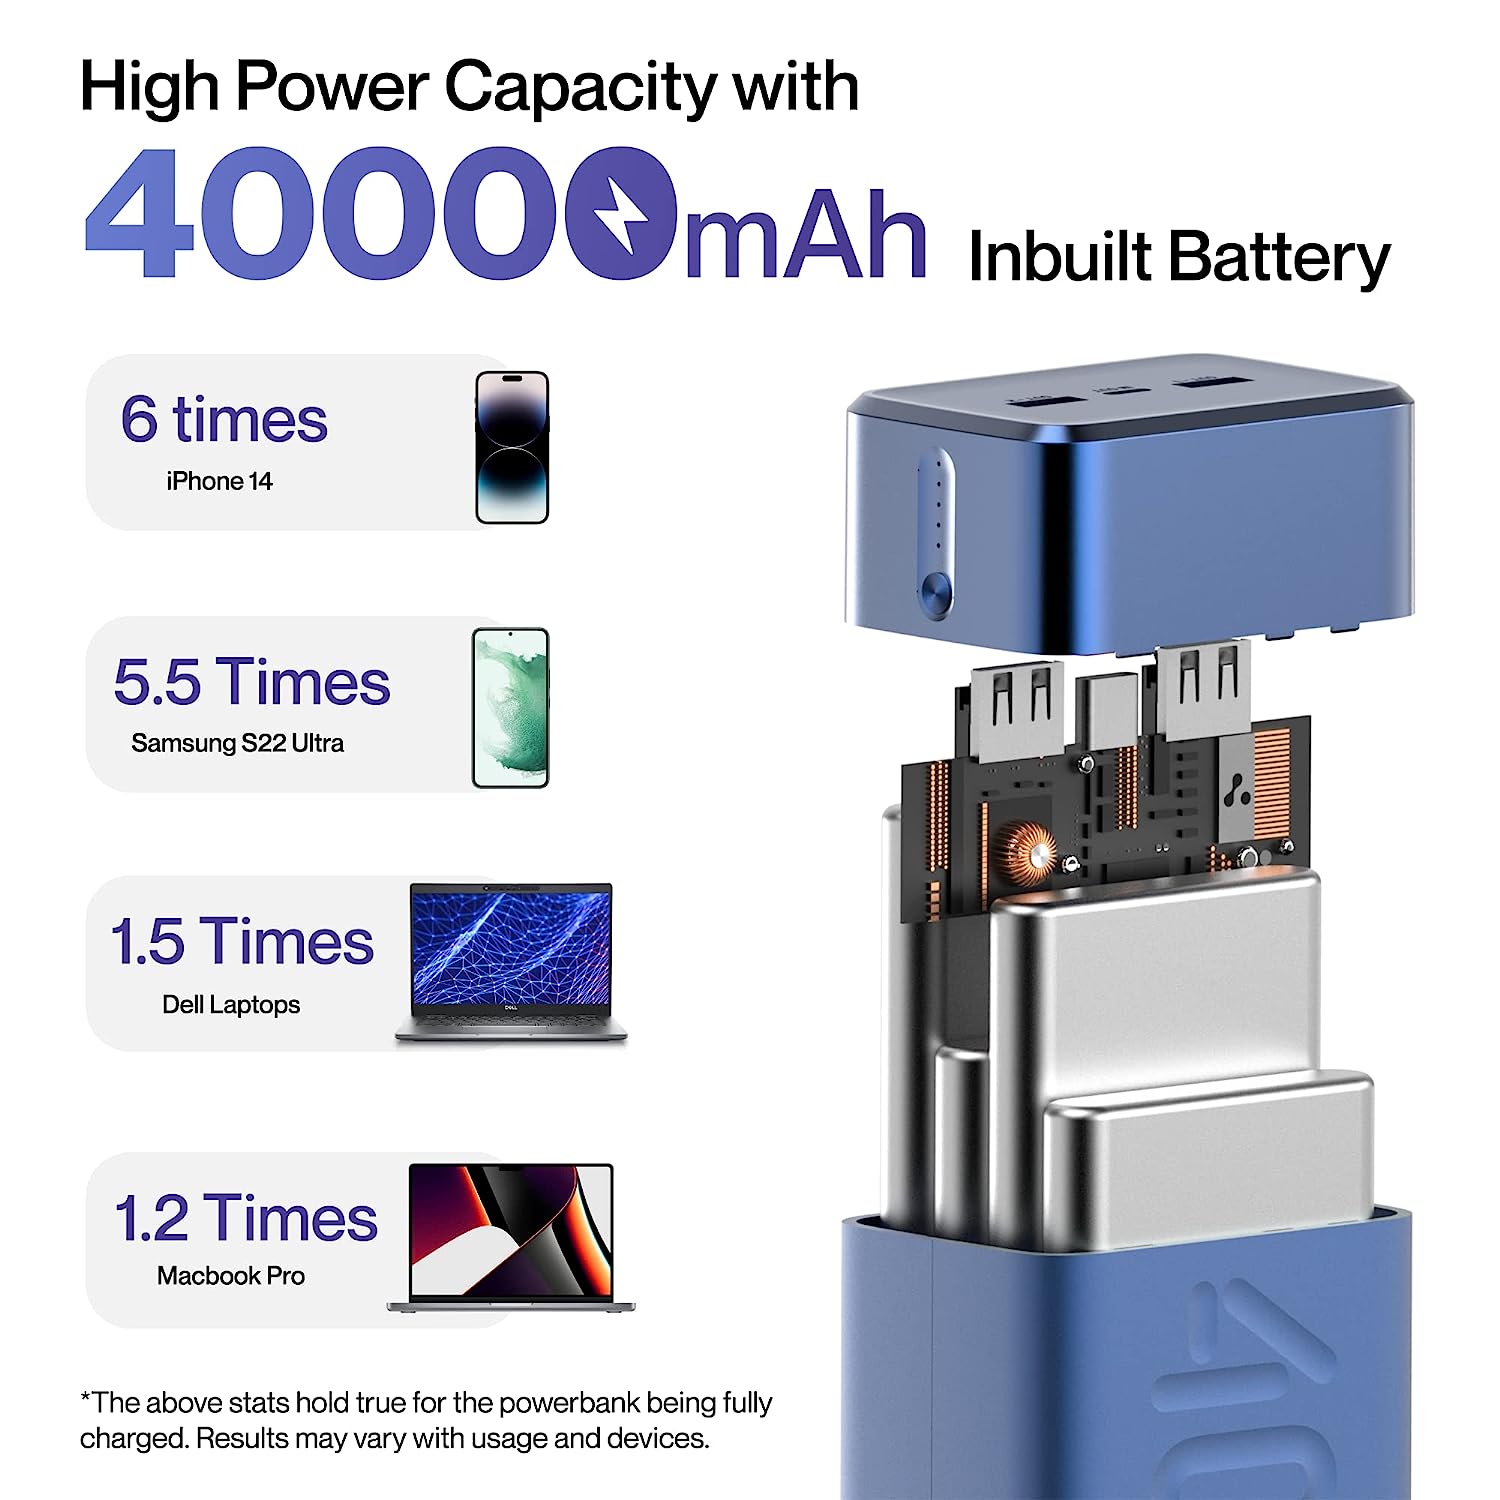 Ambrane 40000mAh Power Bank, 65W Fast Charging, MacBook & Type C Laptops Charging, Triple Output, Type-C PD & USB Ports for iPhones, Smartphones & Other Devices (Stylo Boost, Green)